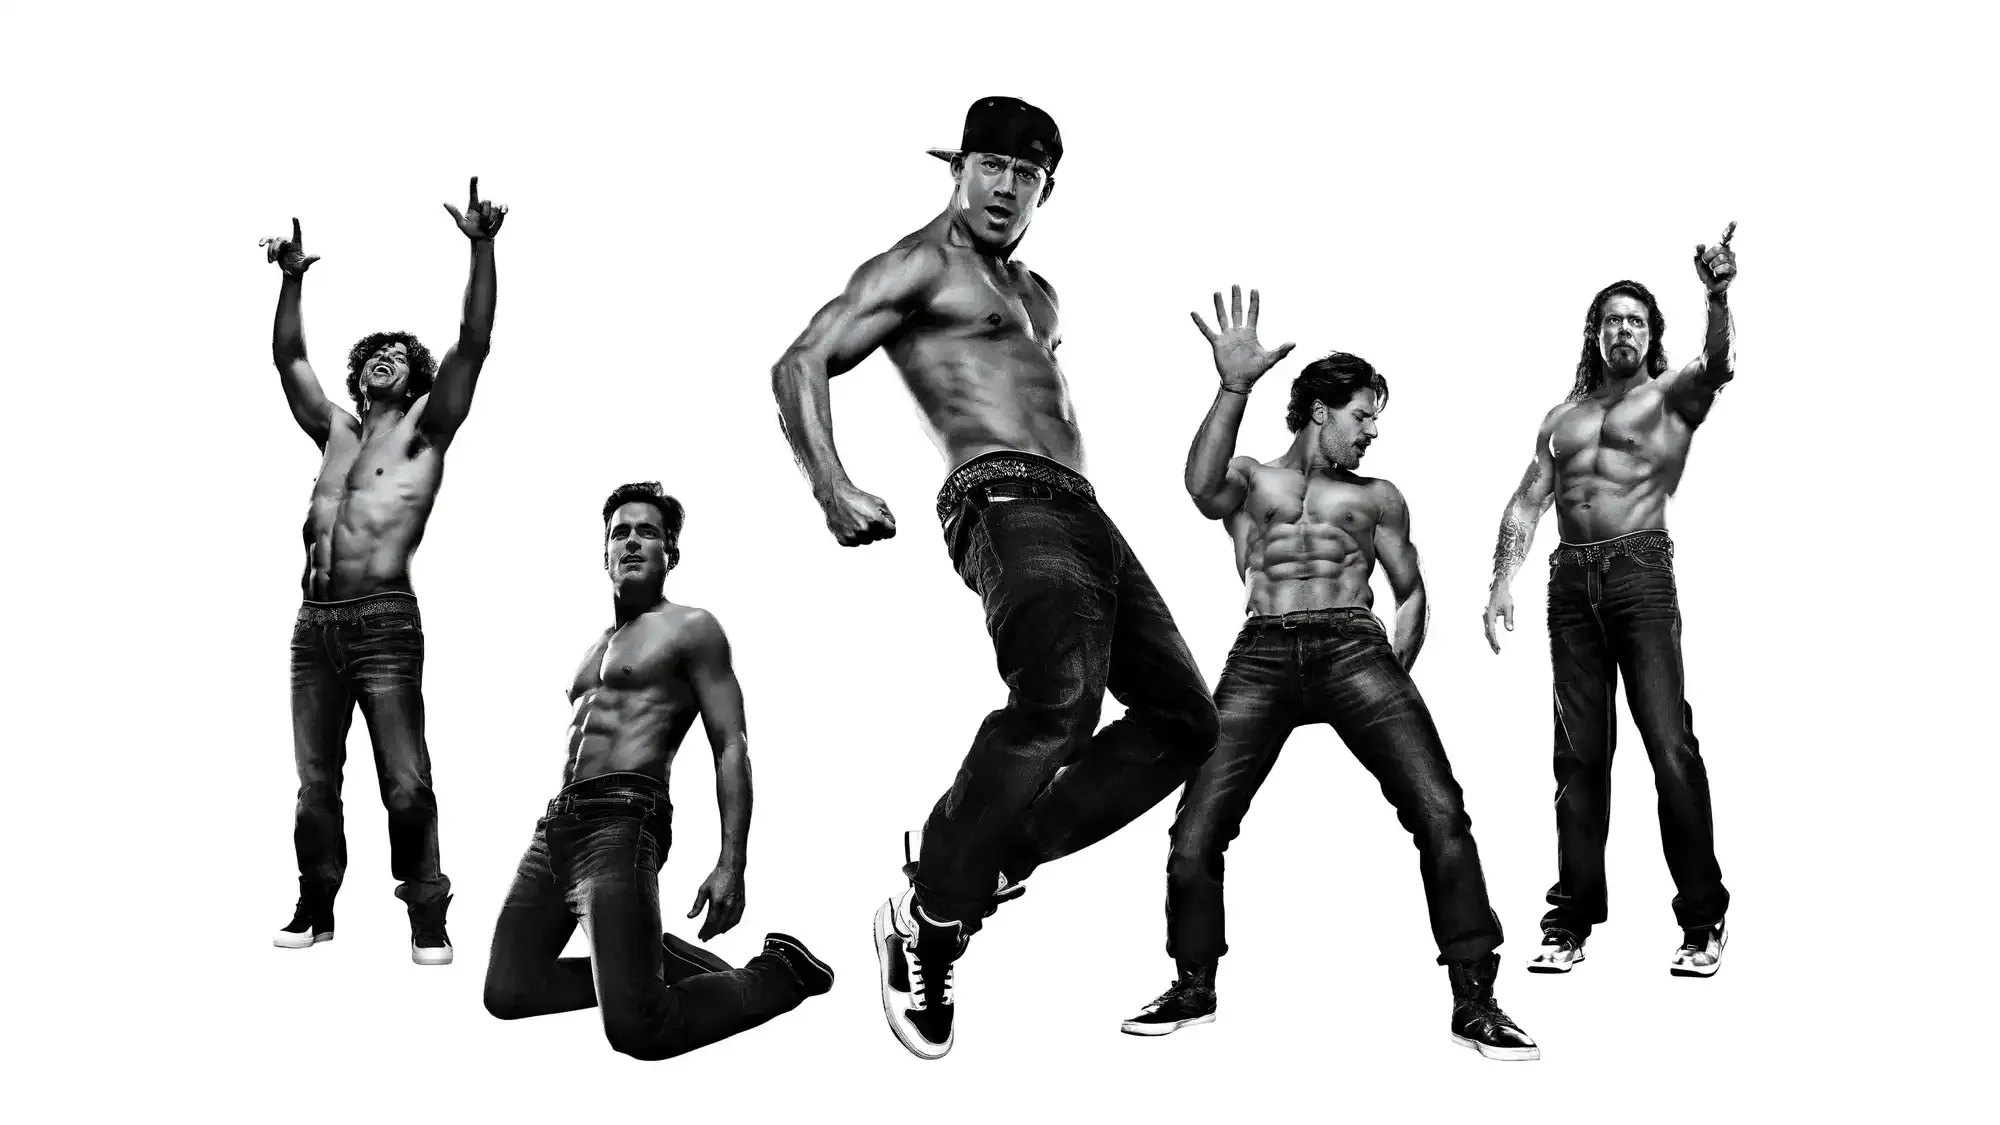 Magic Mike XXL movie review